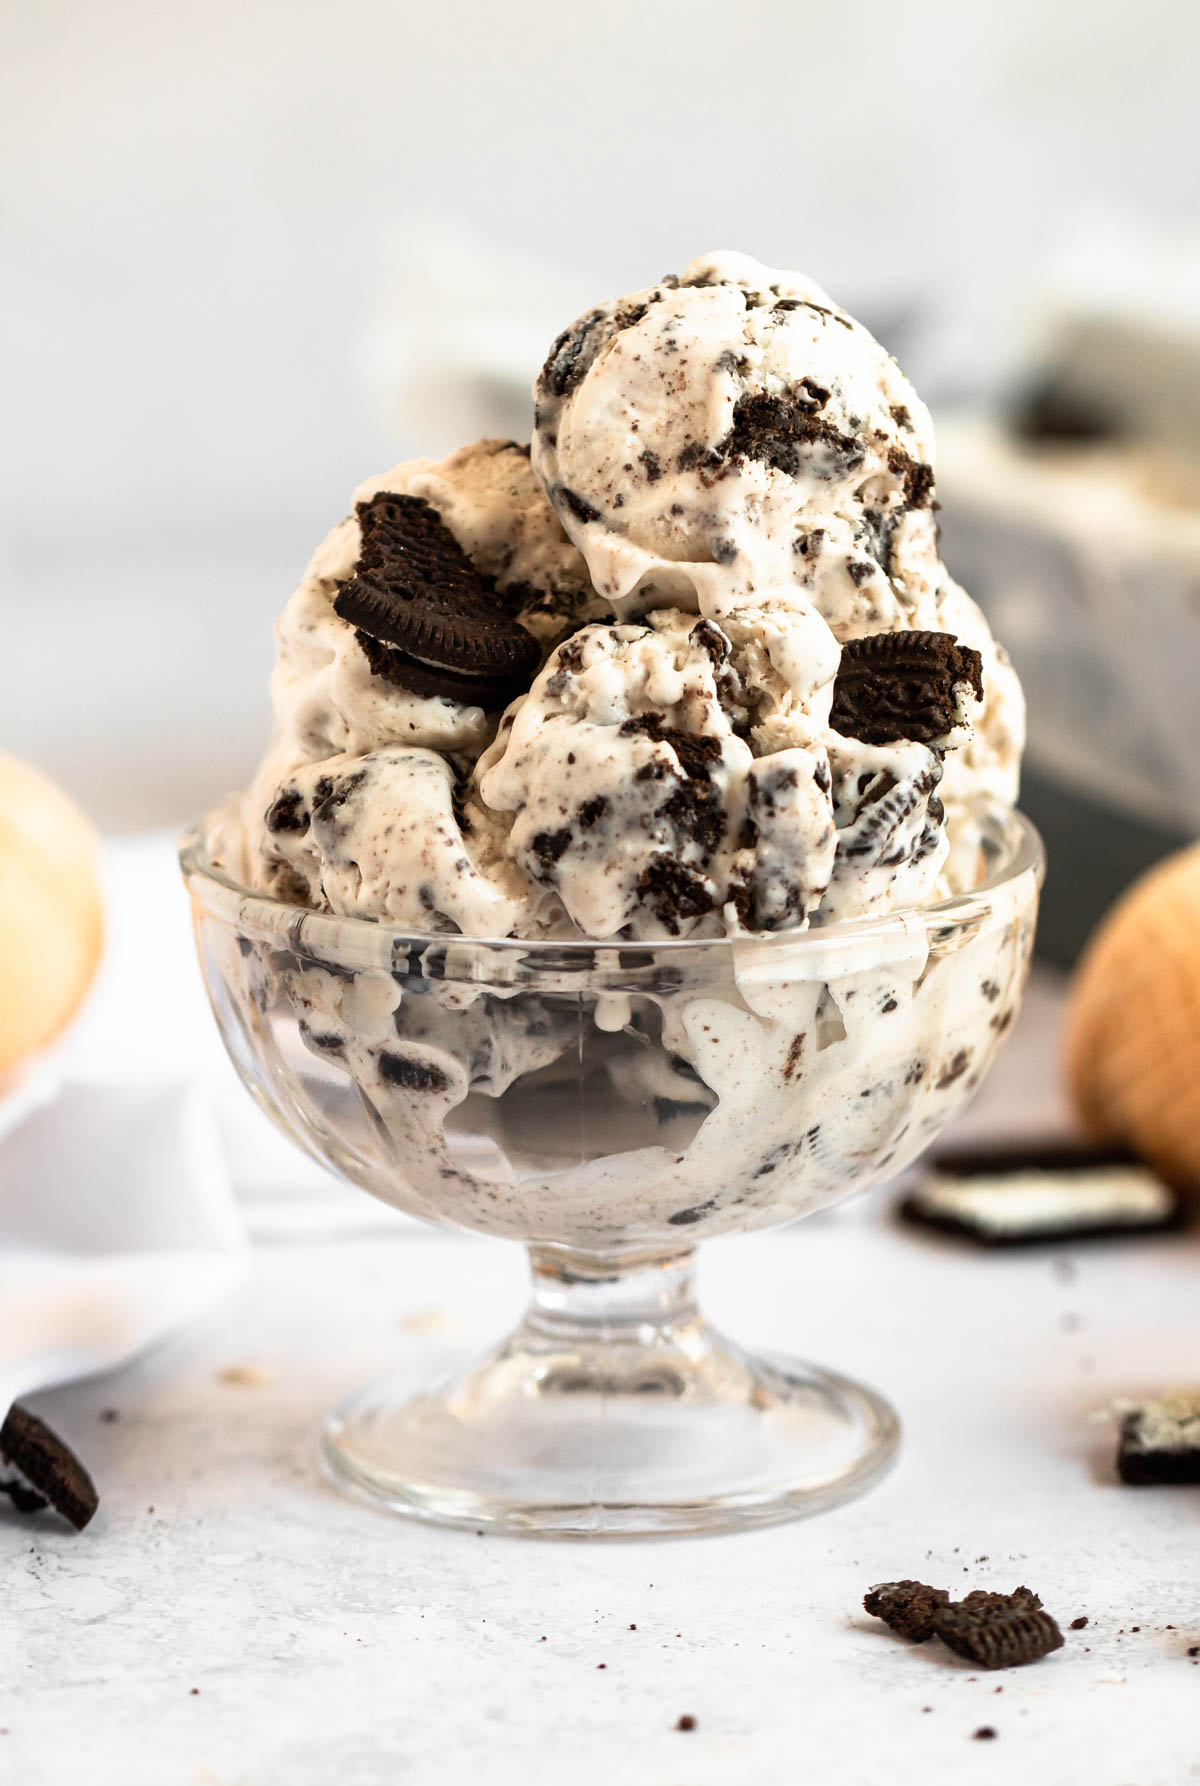 Cookies and cream ice cream in a glass ice cream bowl.